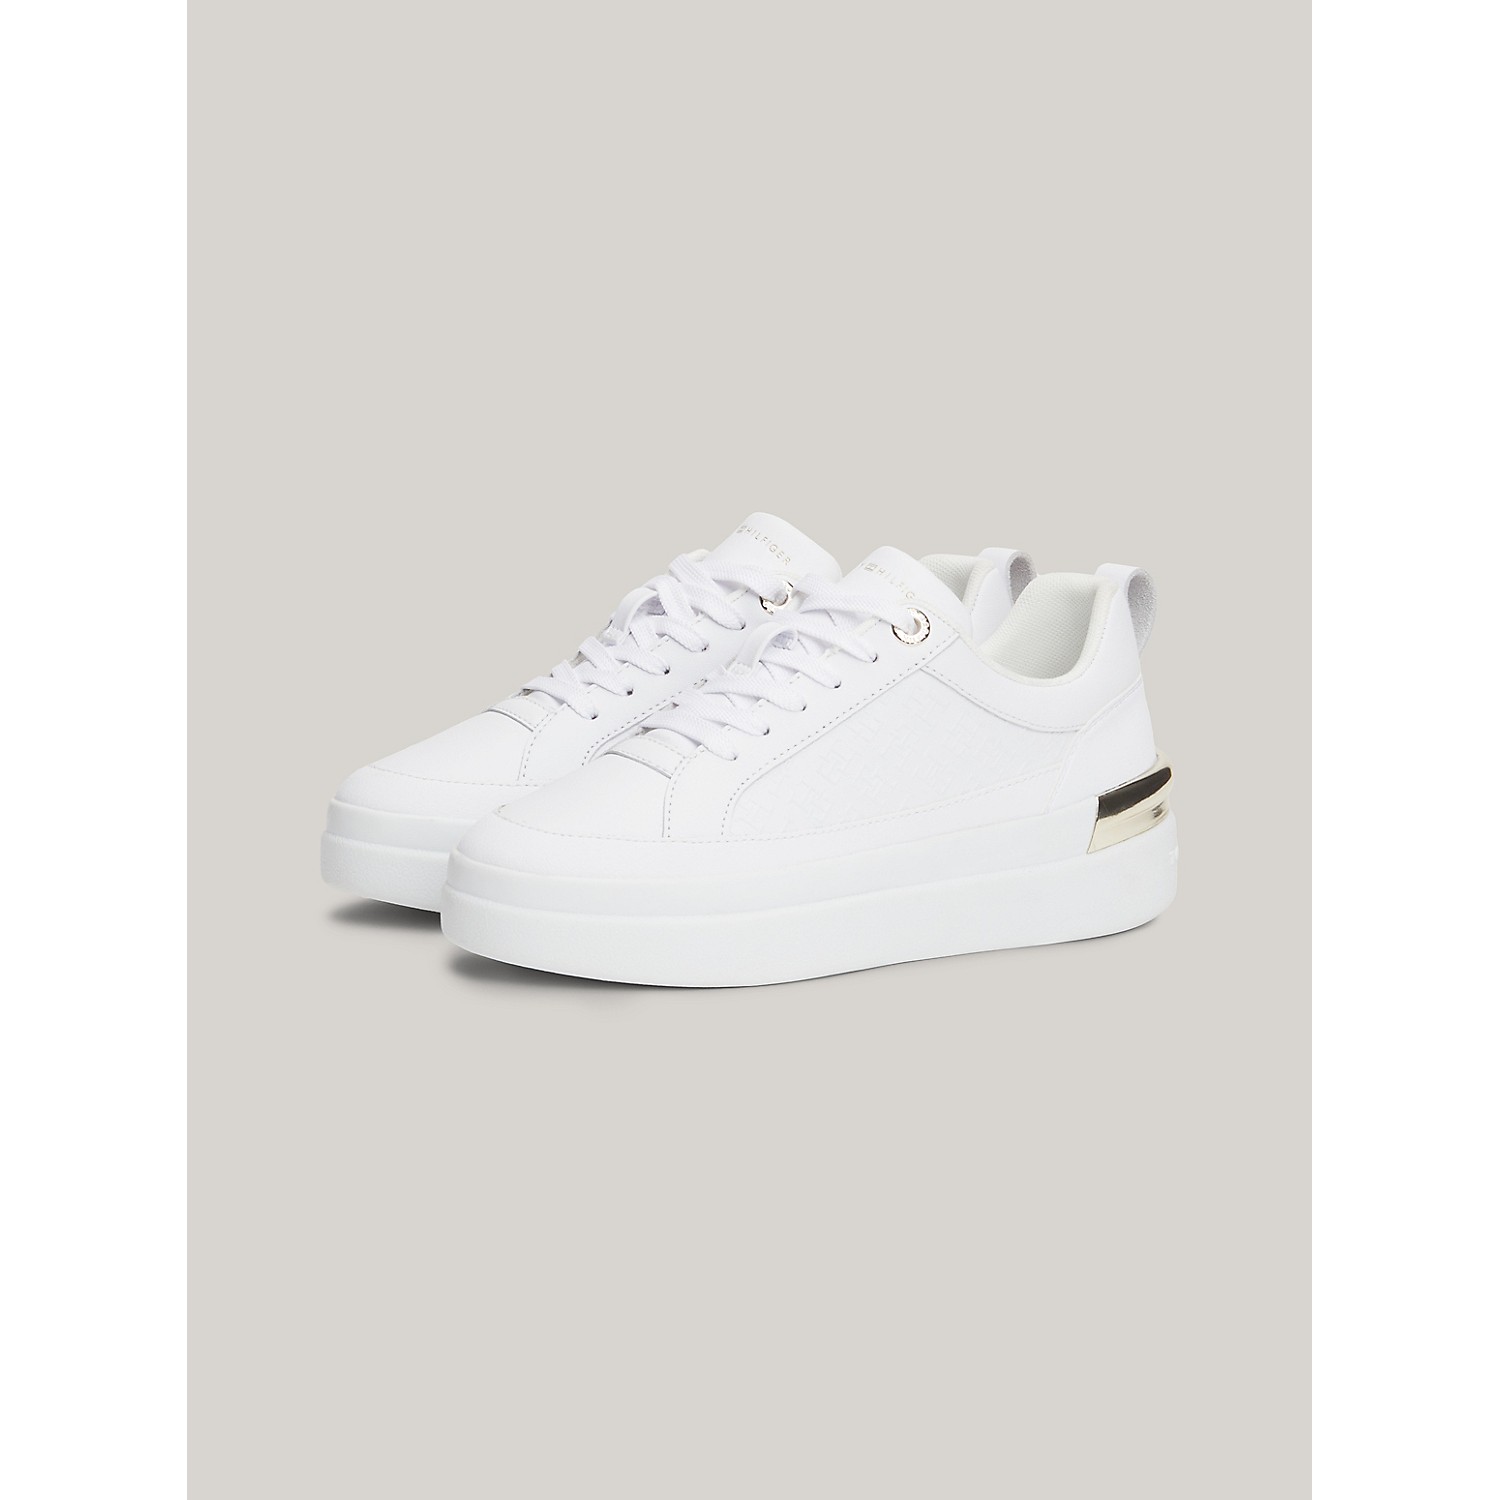 TOMMY HILFIGER Monogram Luxe Leather Cupsole Sneaker